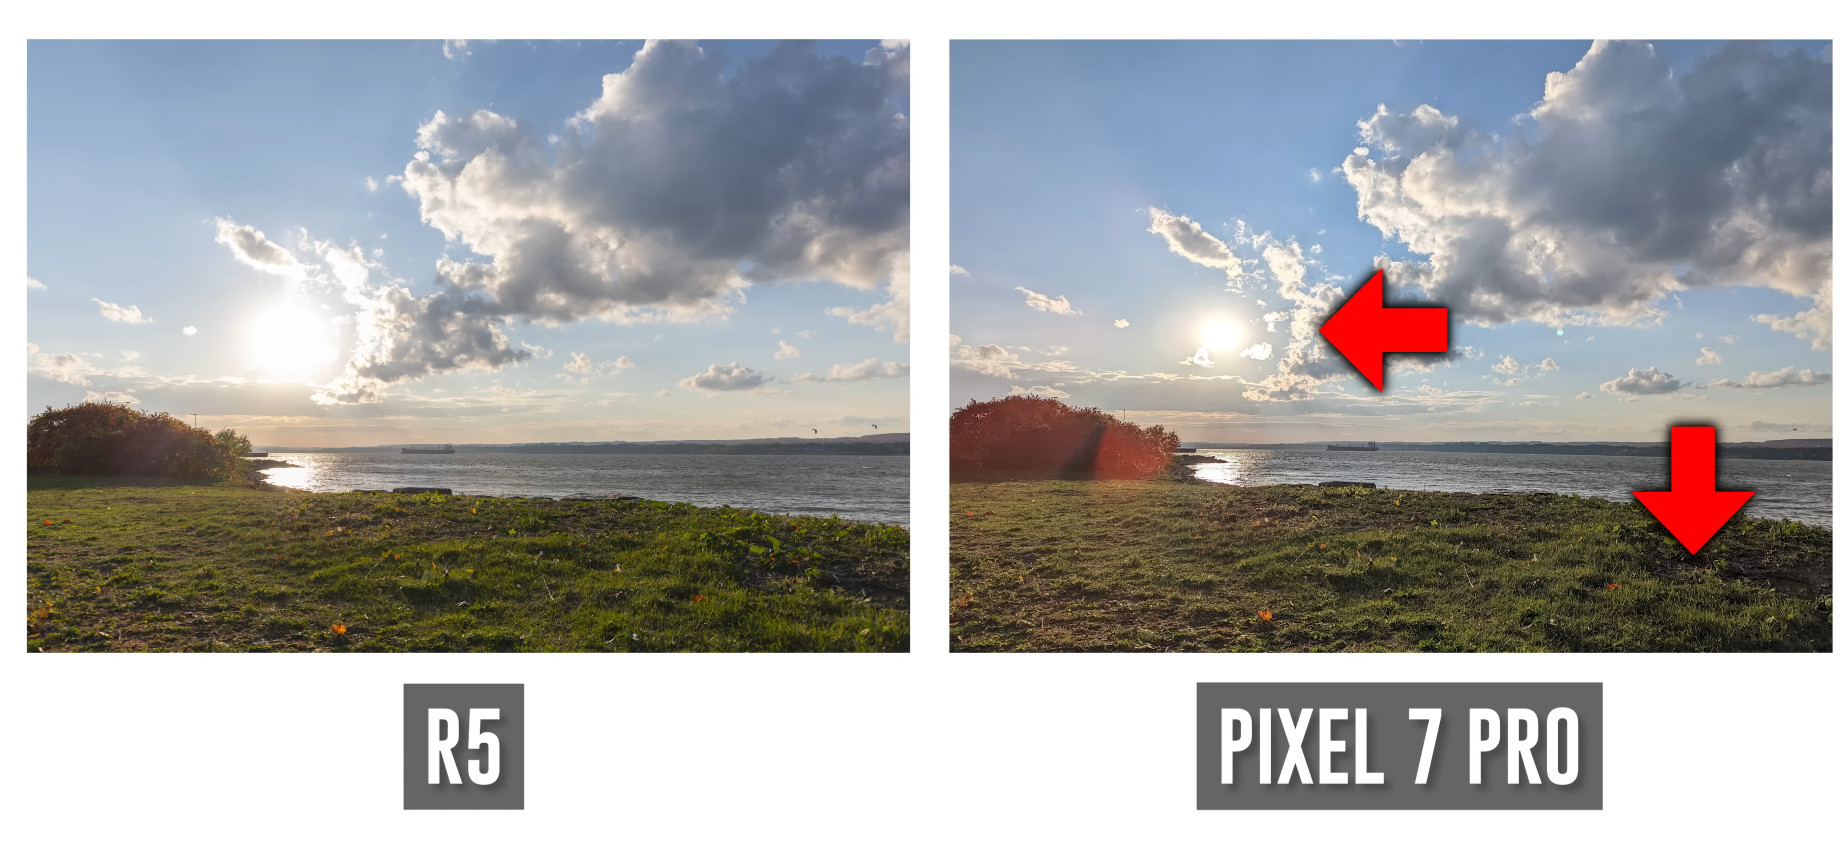 https://www.youtube.com/watch?v=7-GqBOf2eec https://www.dpreview.com/news/6125283026/video-google-pixel-7-pro-vs-canon-r5-difference-between-smartphones-real-cameras heavy HDR and sharpening post processing